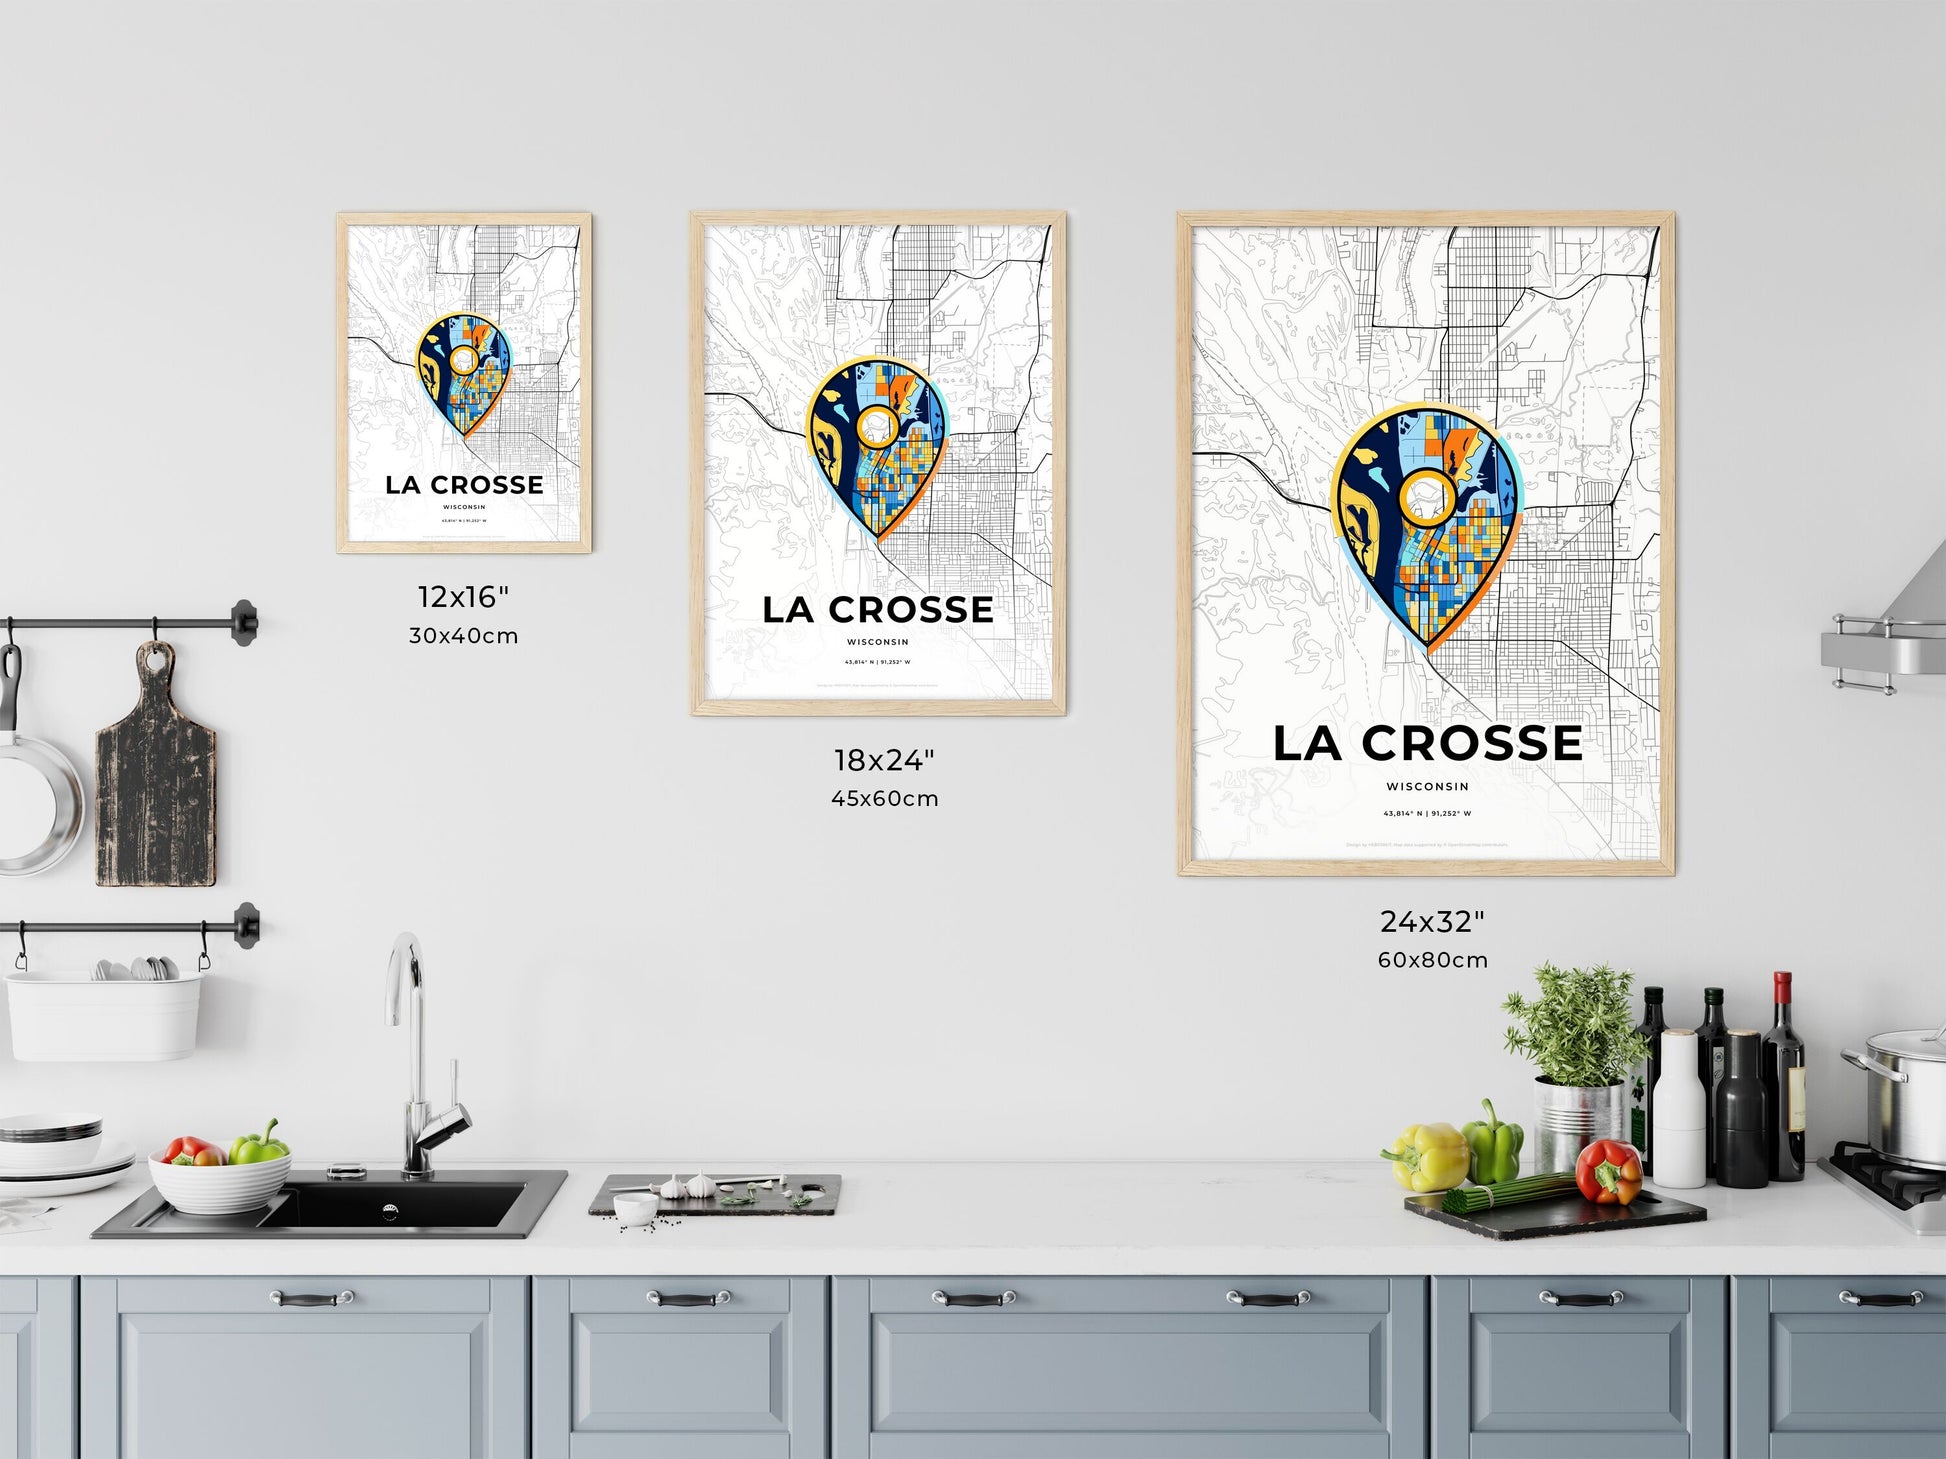 LA CROSSE WISCONSIN minimal art map with a colorful icon. Where it all began, Couple map gift.